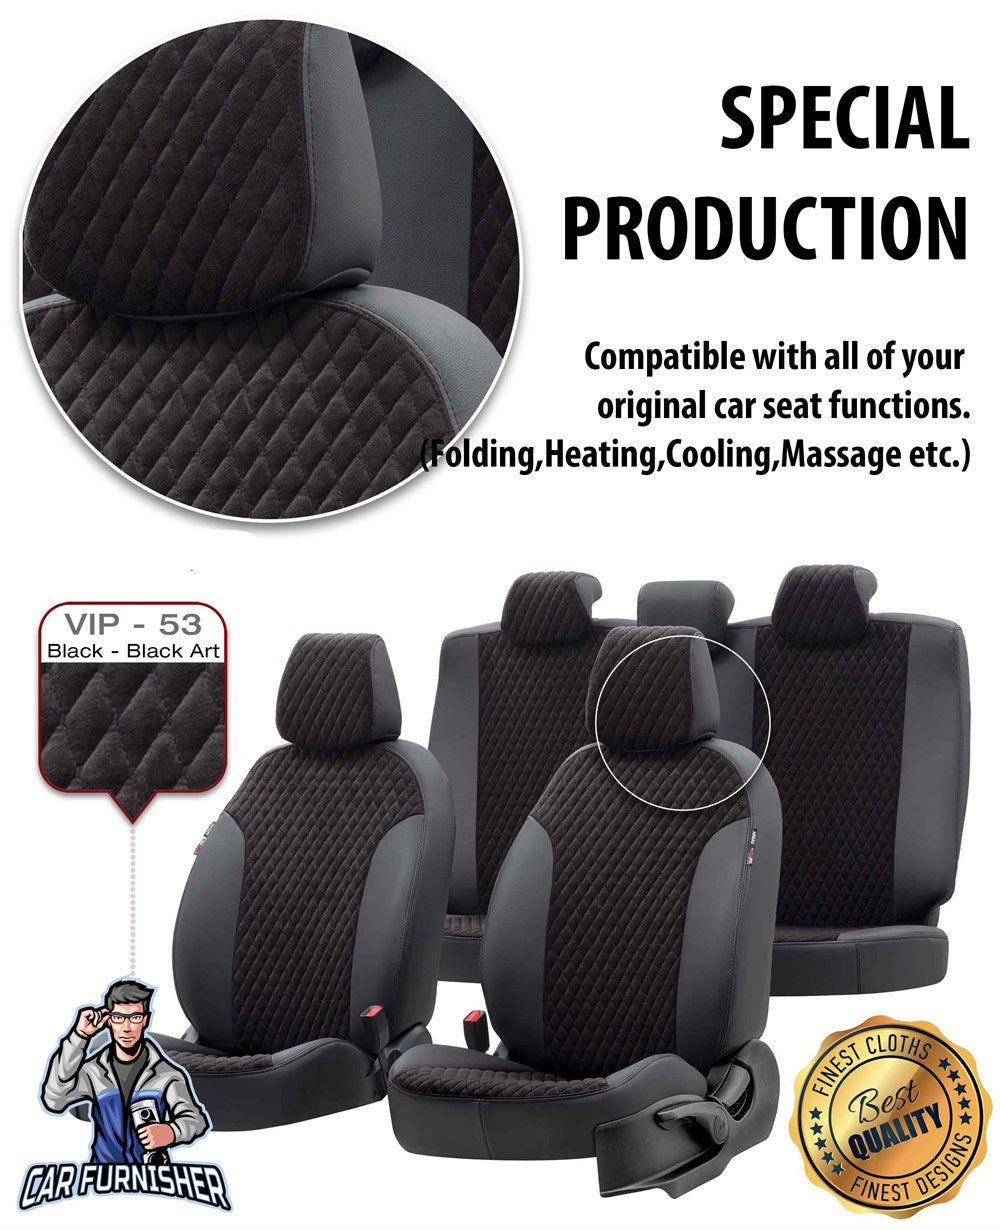 Mitsubishi Colt Seat Covers Amsterdam Foal Feather Design Smoked Black Leather & Foal Feather